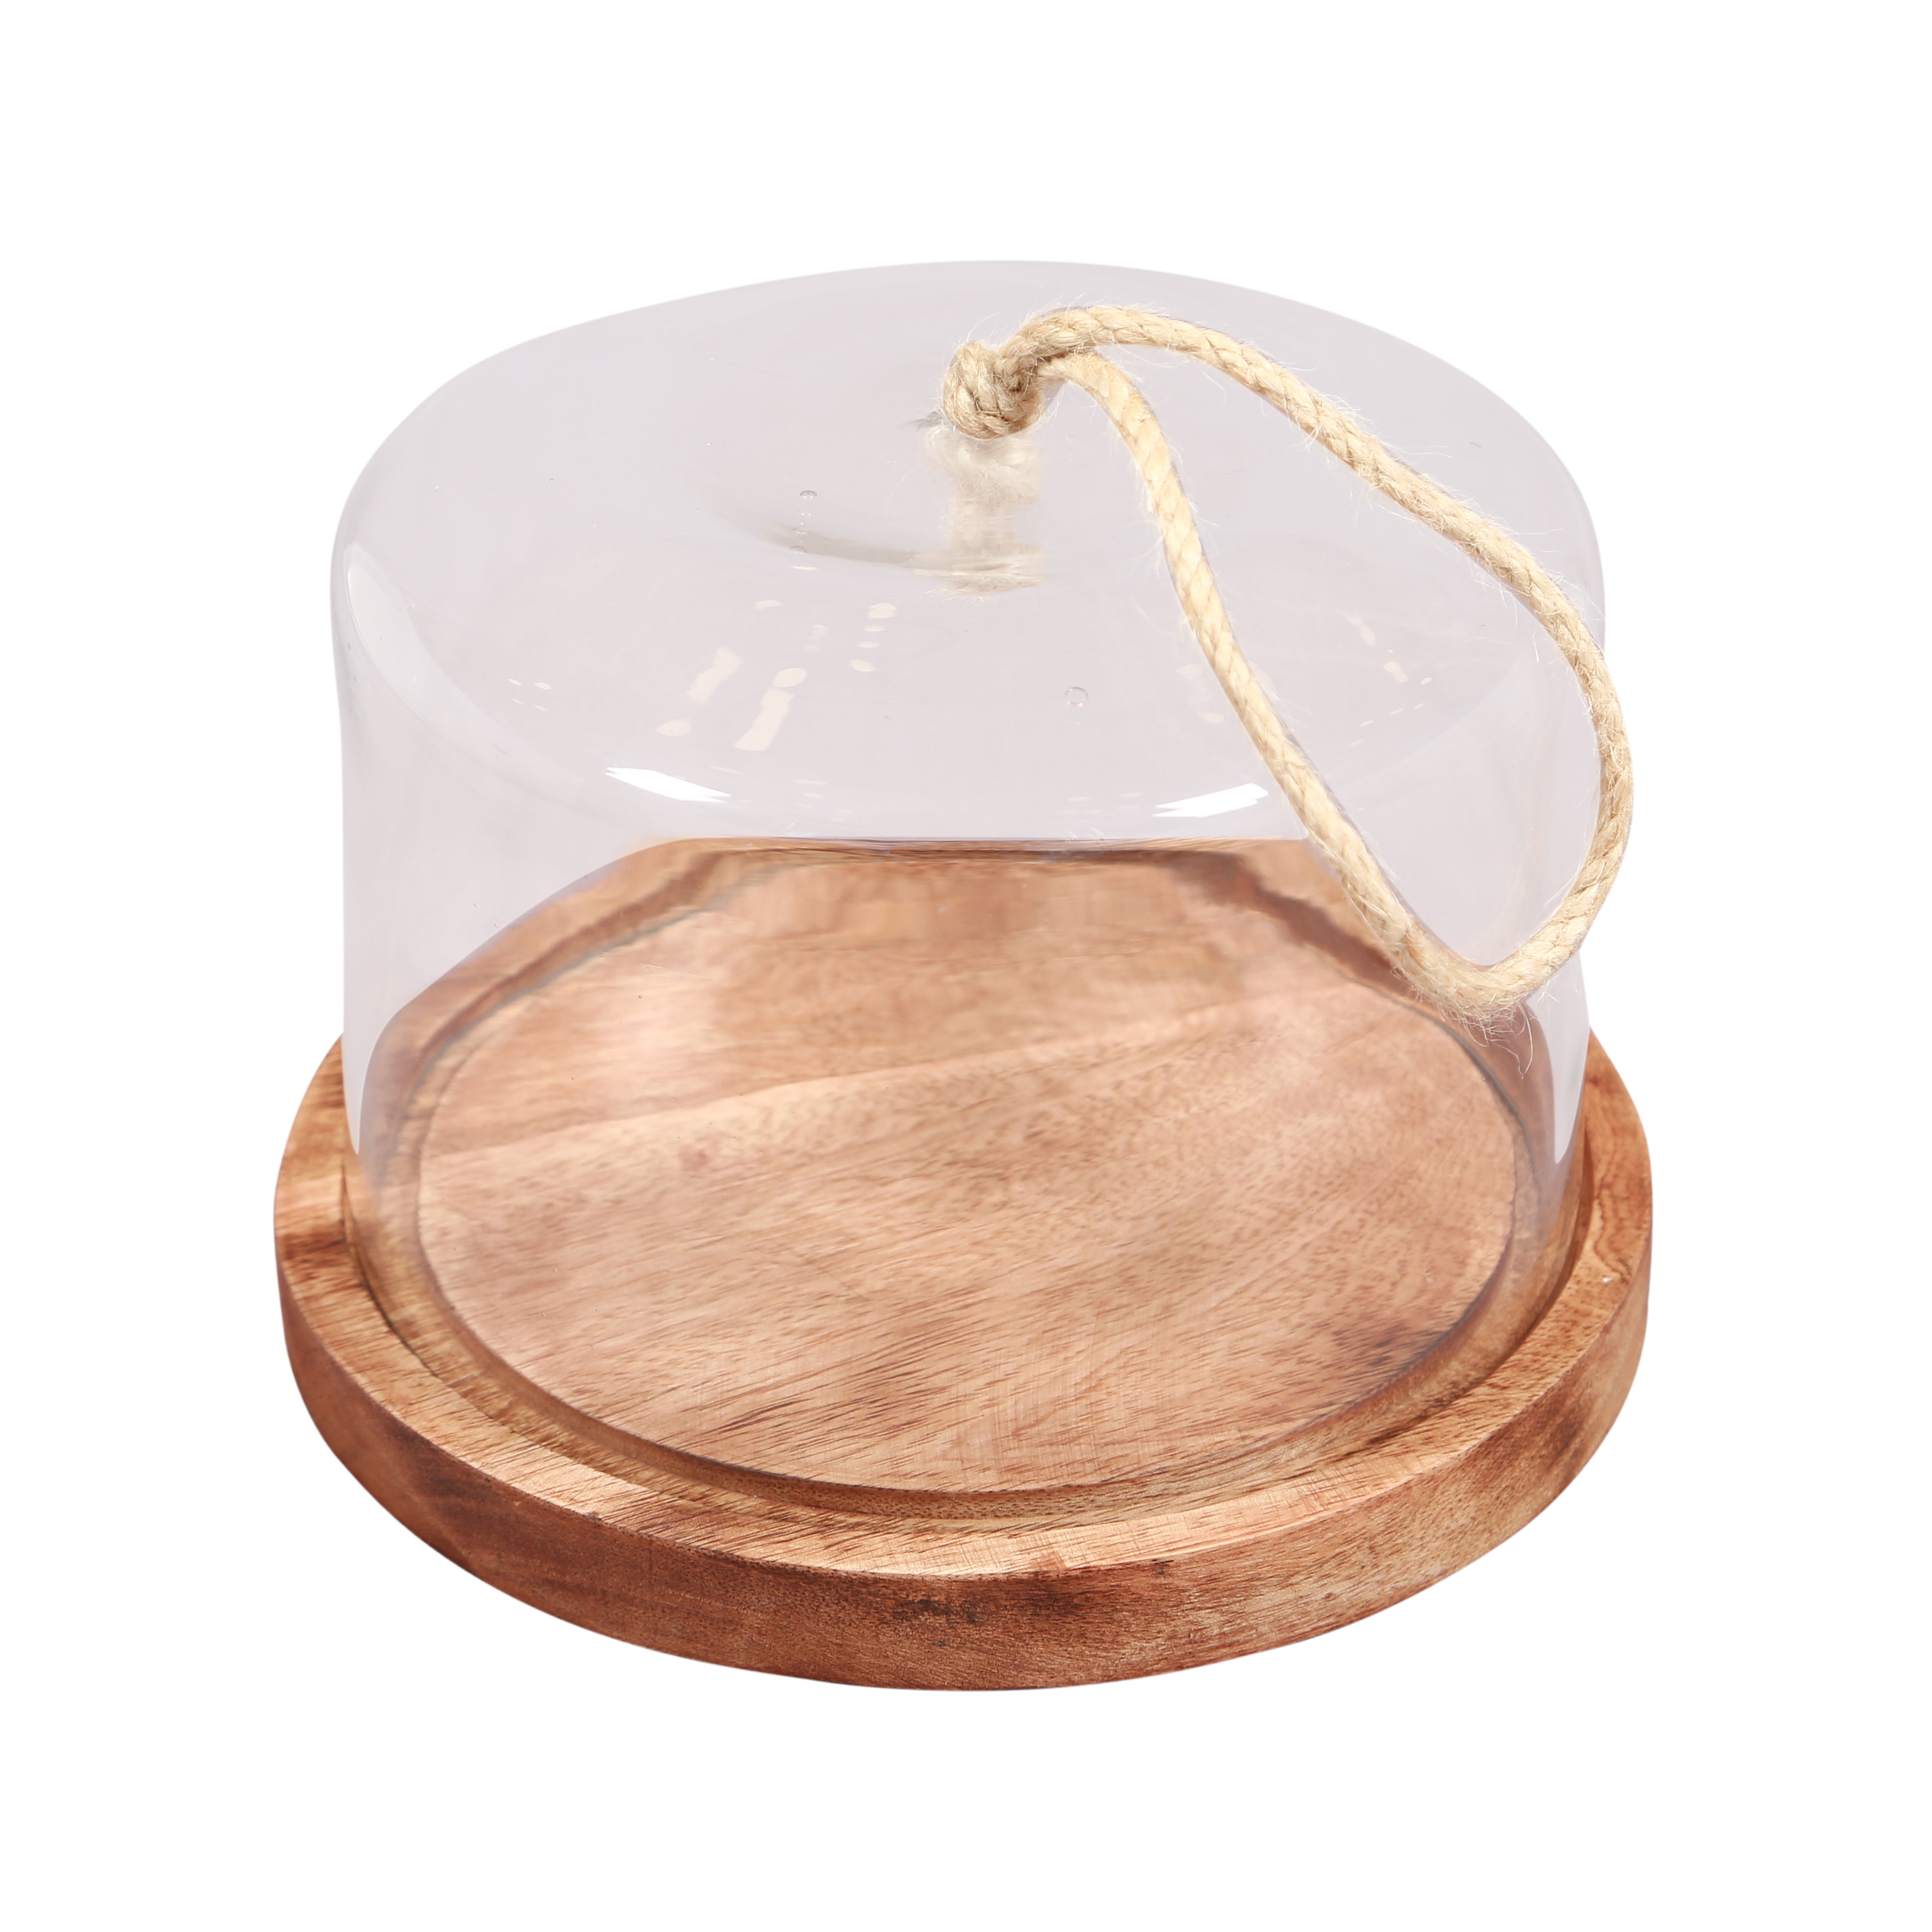 Glass and Wooden Cakedome 6 inches